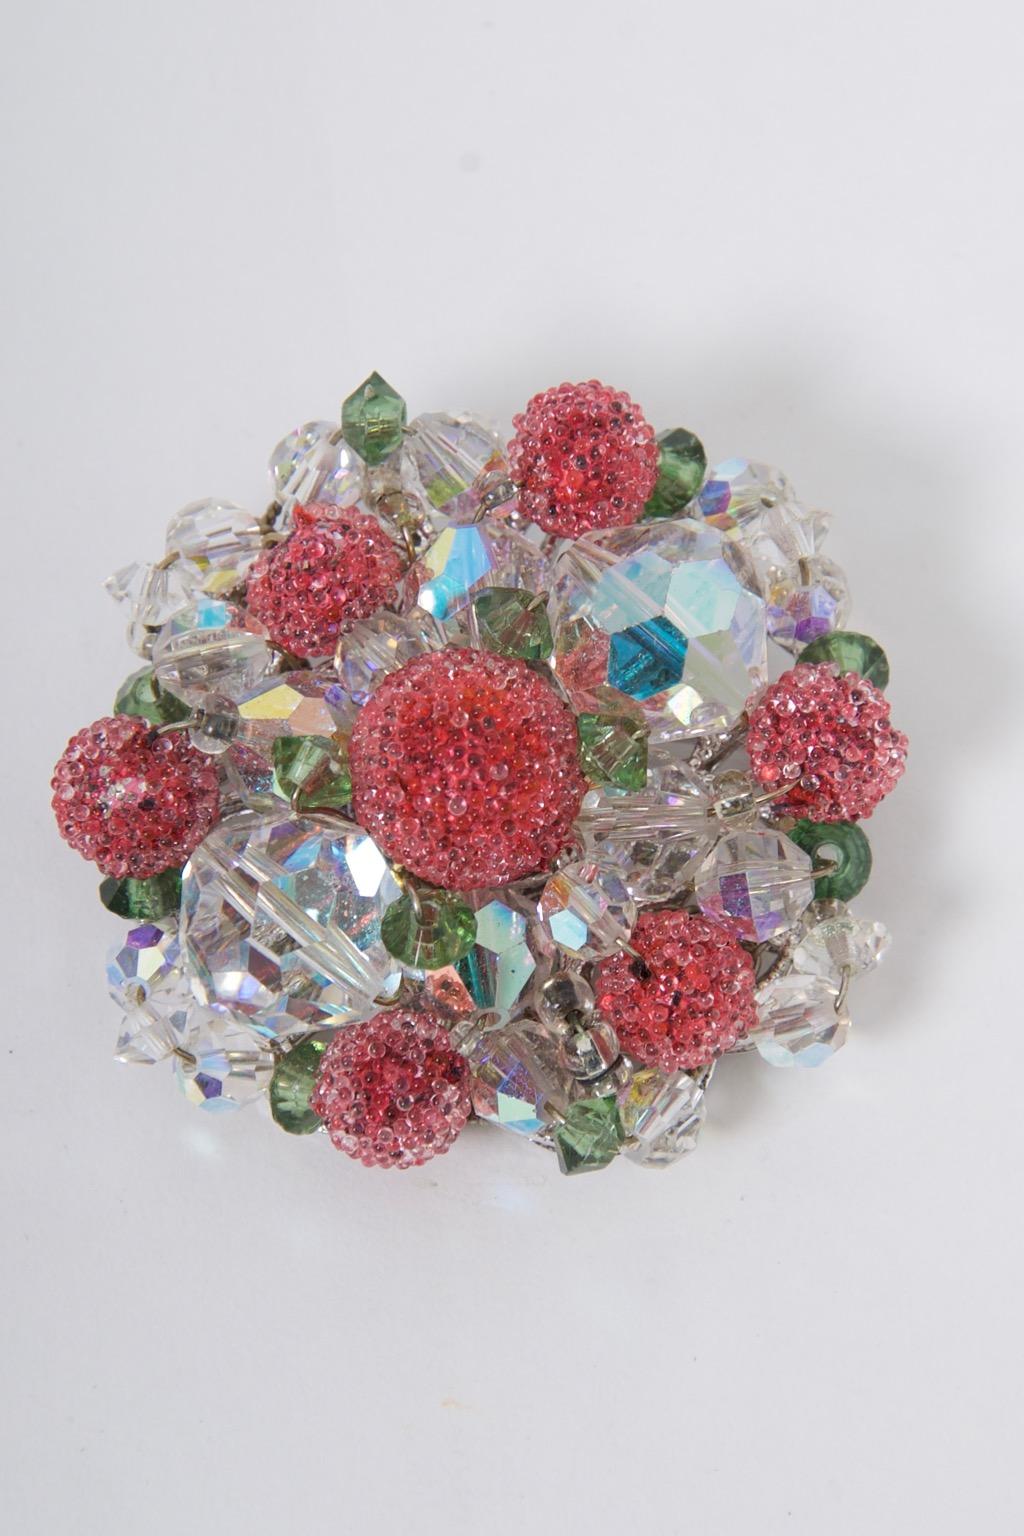 Vendome parure comprising a brooch, bracelet, and earrings, each composed of aurora borealis and green crystals of varying sizes, and each accented by spheres covered with coral mini beads evocative of flowers in bloom. The brooch has a silver tone